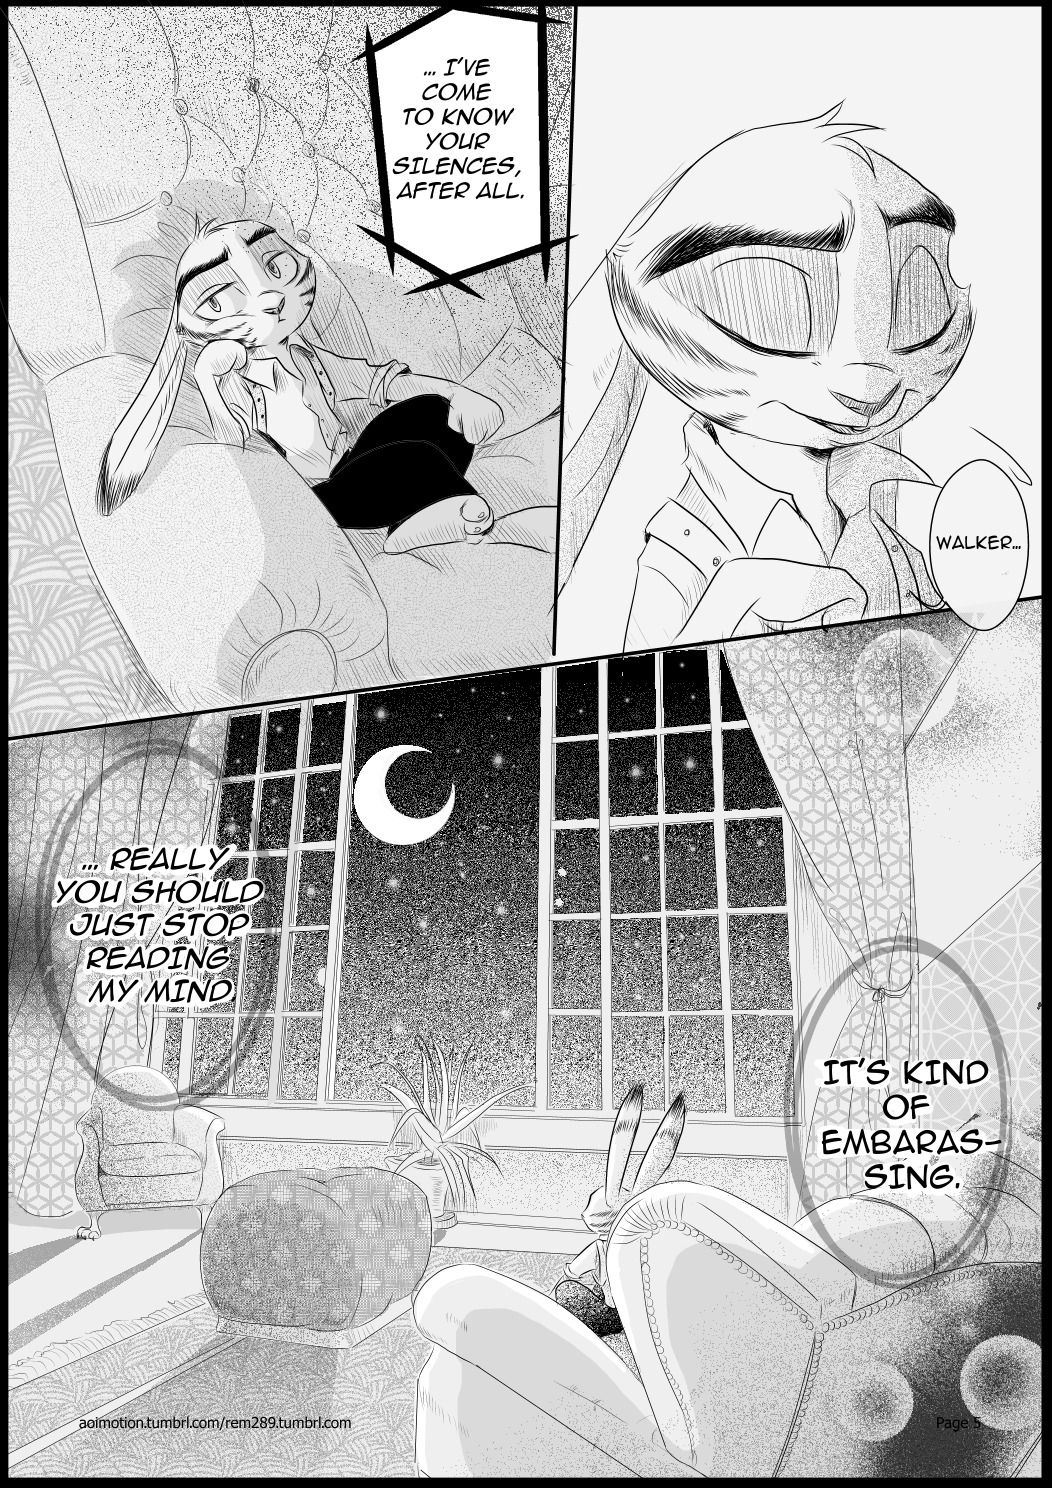 [Rem289] Black♡Jack V - The Good and The Bad (Zootopia) (English) 14